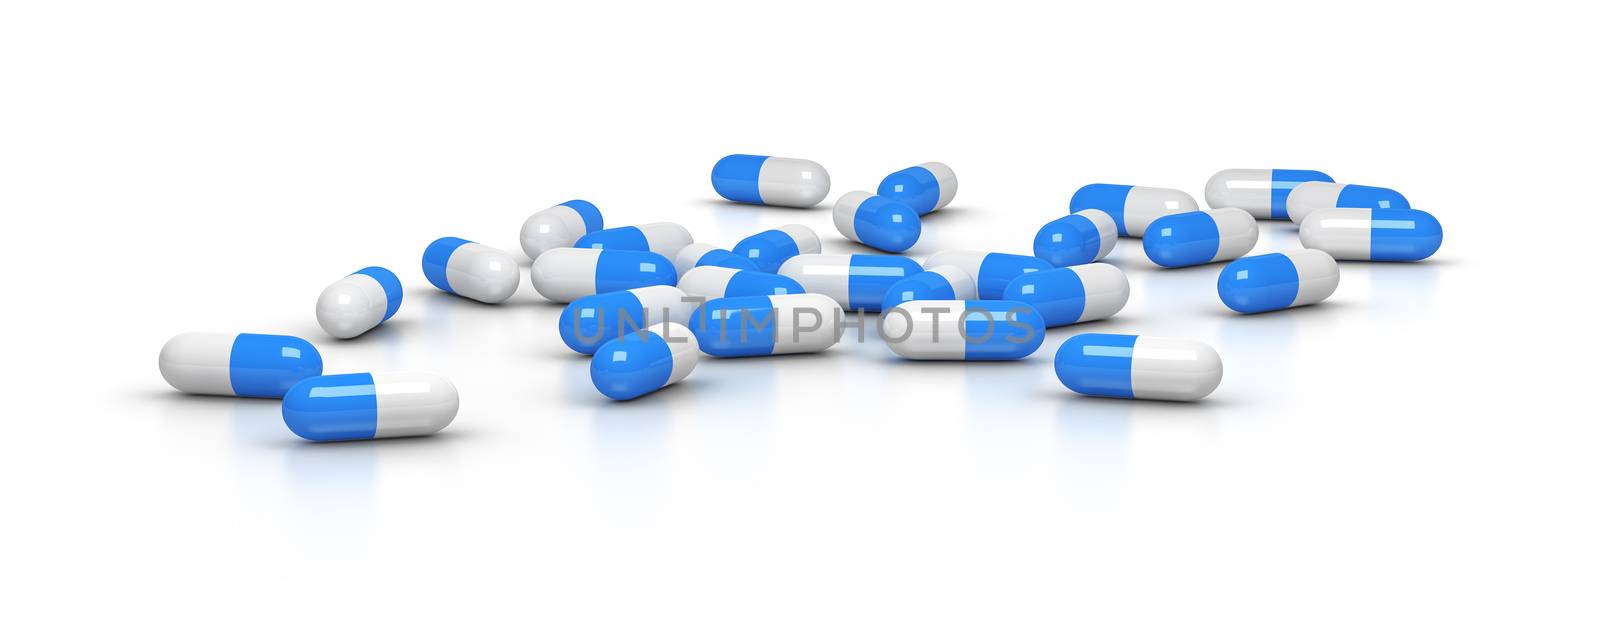 An image of some blue pills on a white background